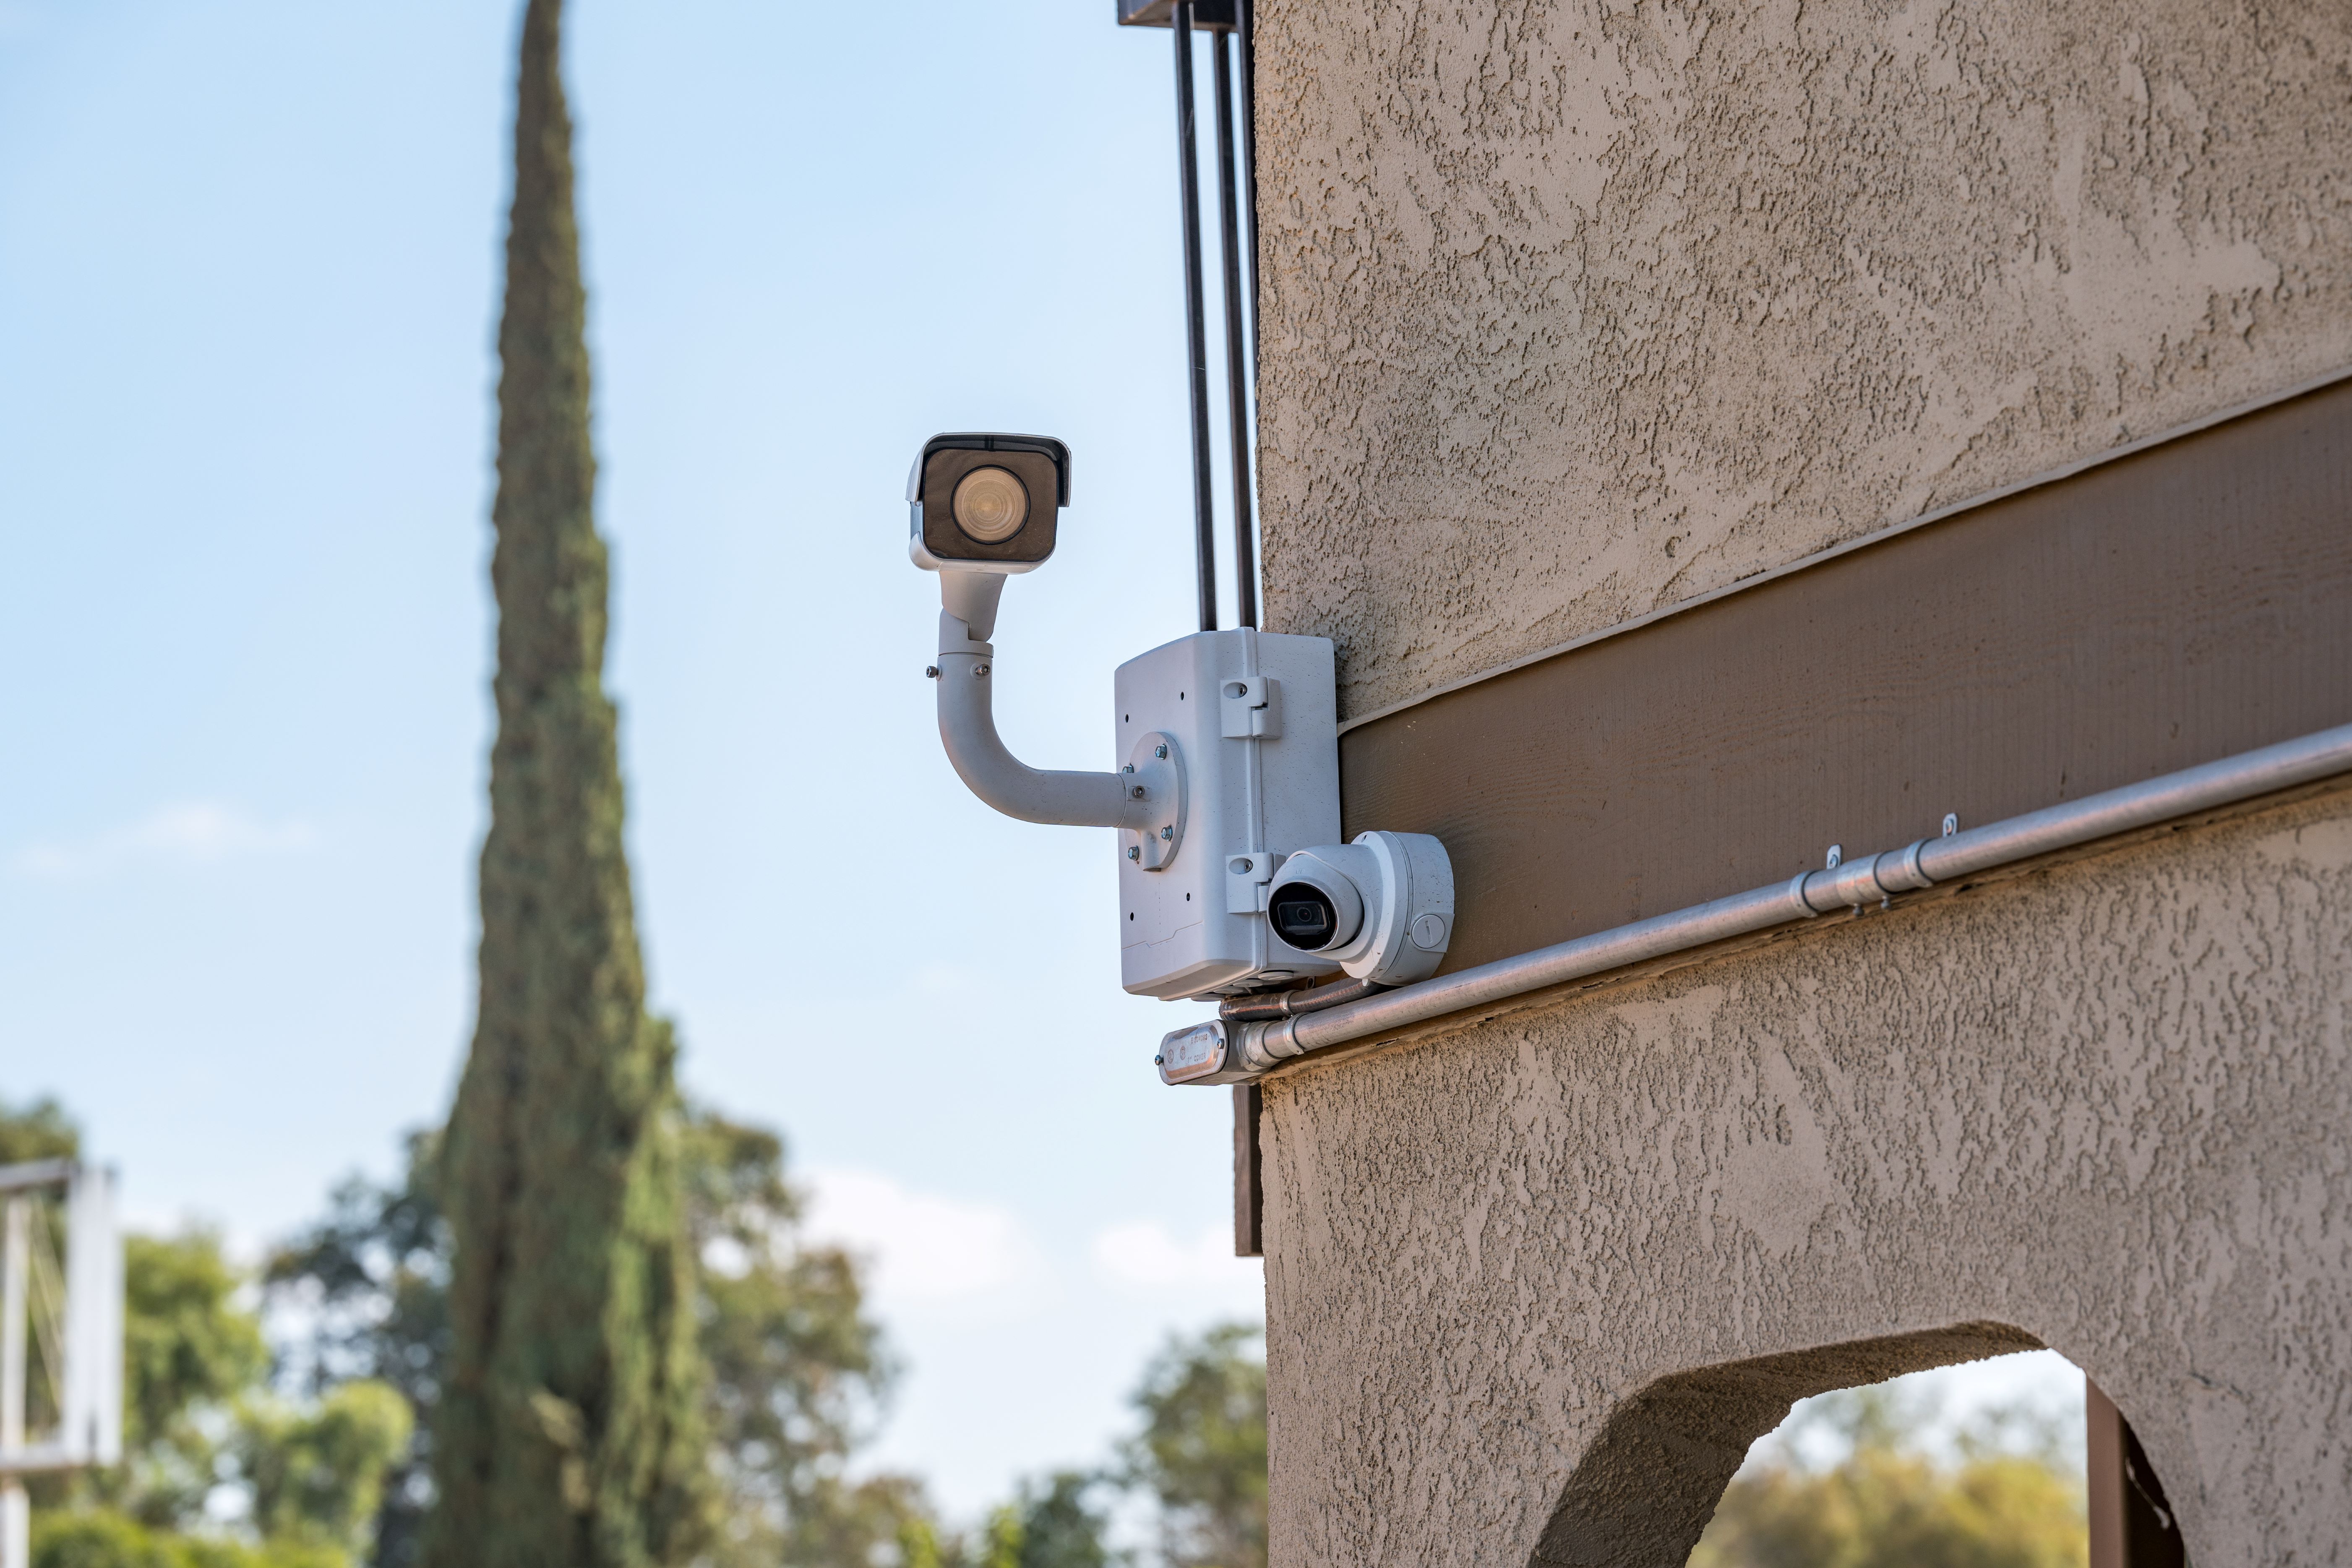 24/7 Video Camera Surveillance To Provide You With Peace Of Mind